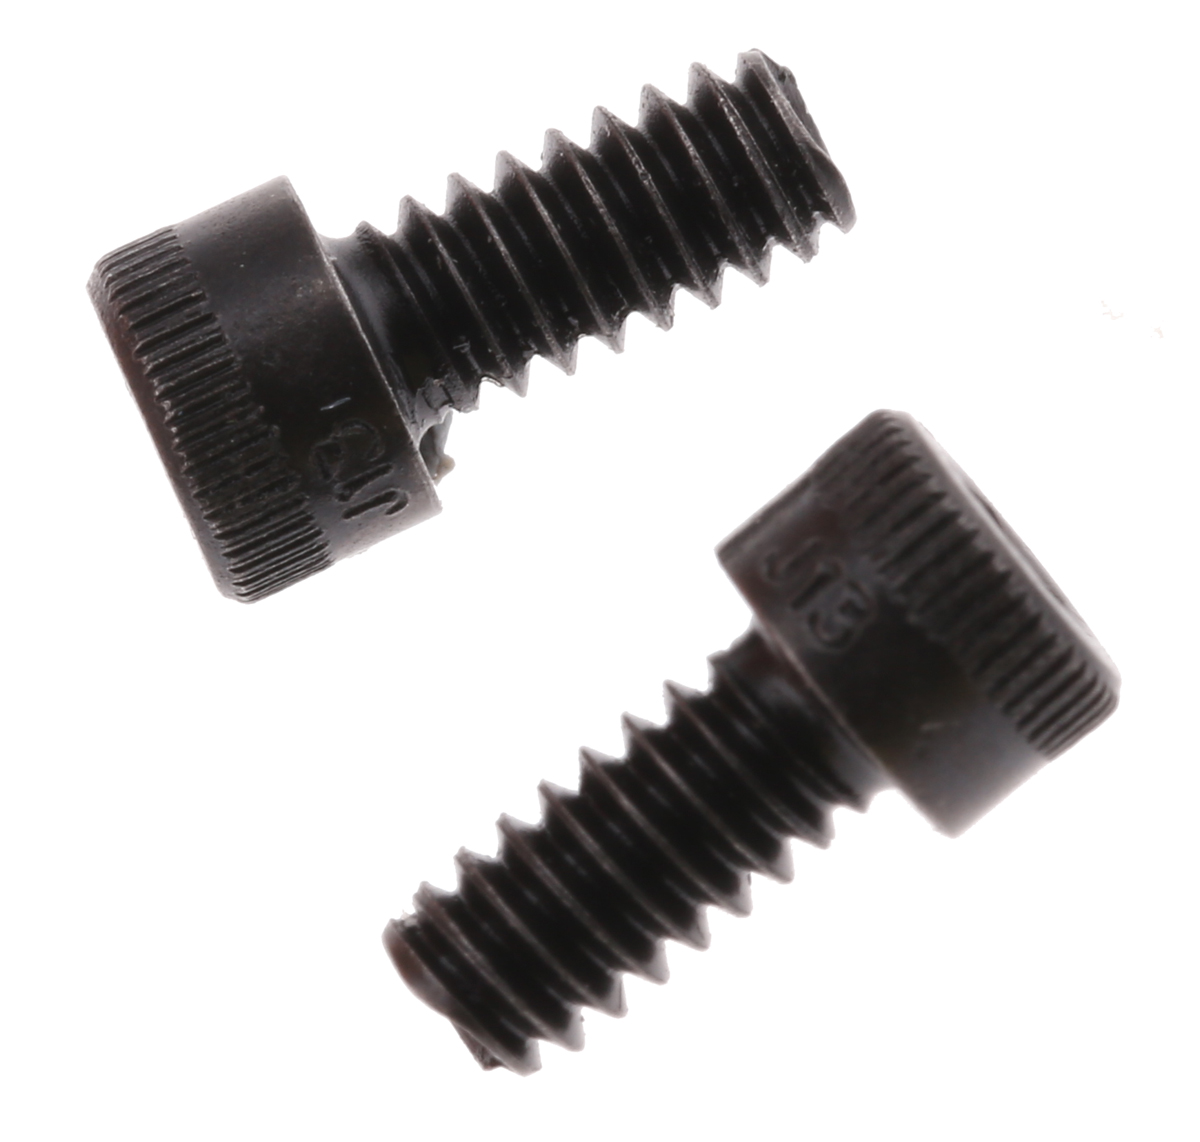 Socket Screws: Everything You Need to Know